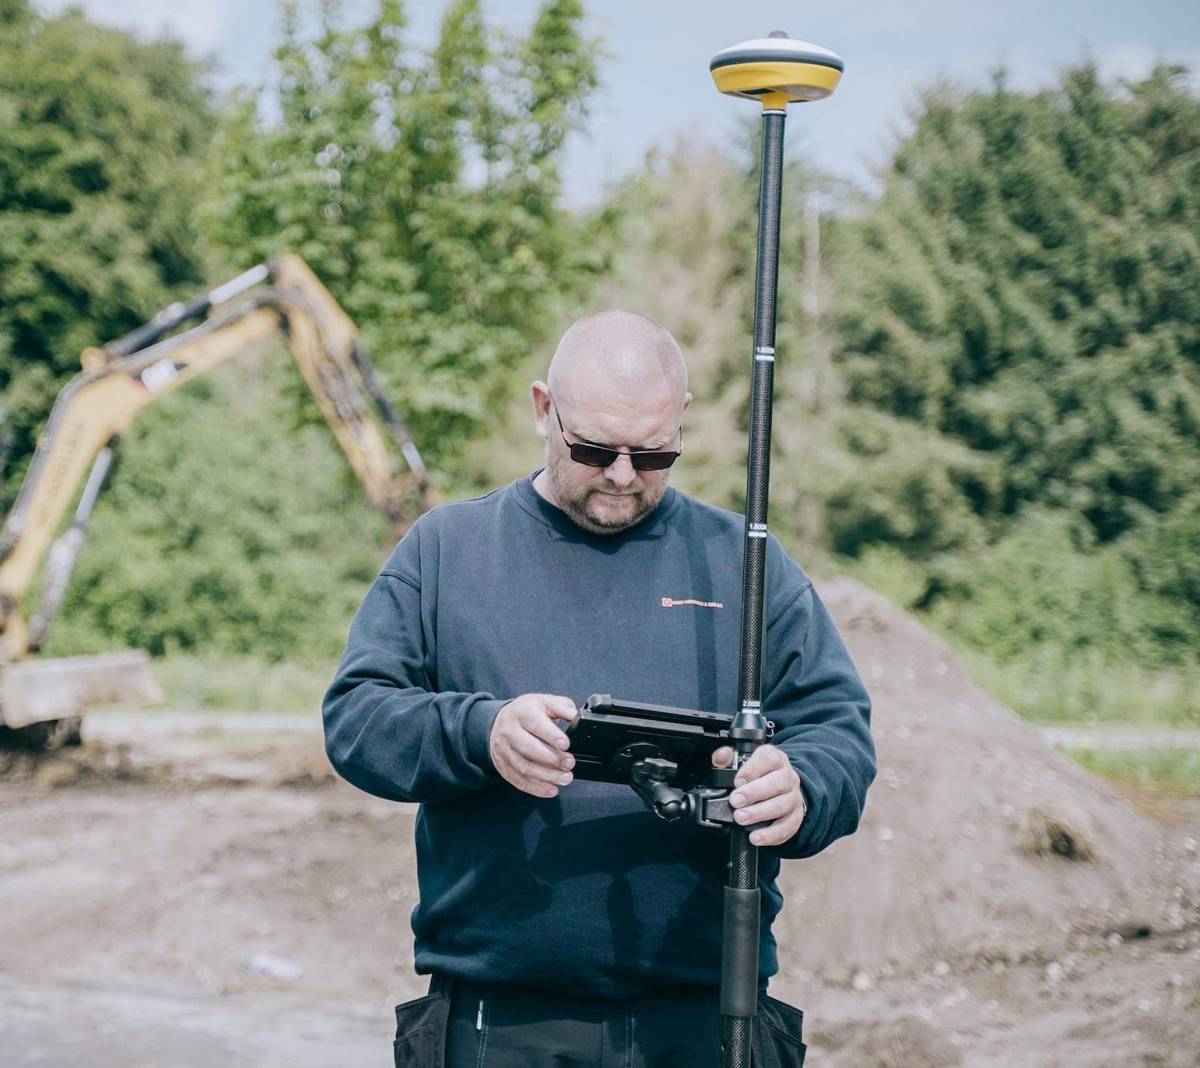 User-friendly Unicontrol Rover allows easy site Measurement and Digitisation